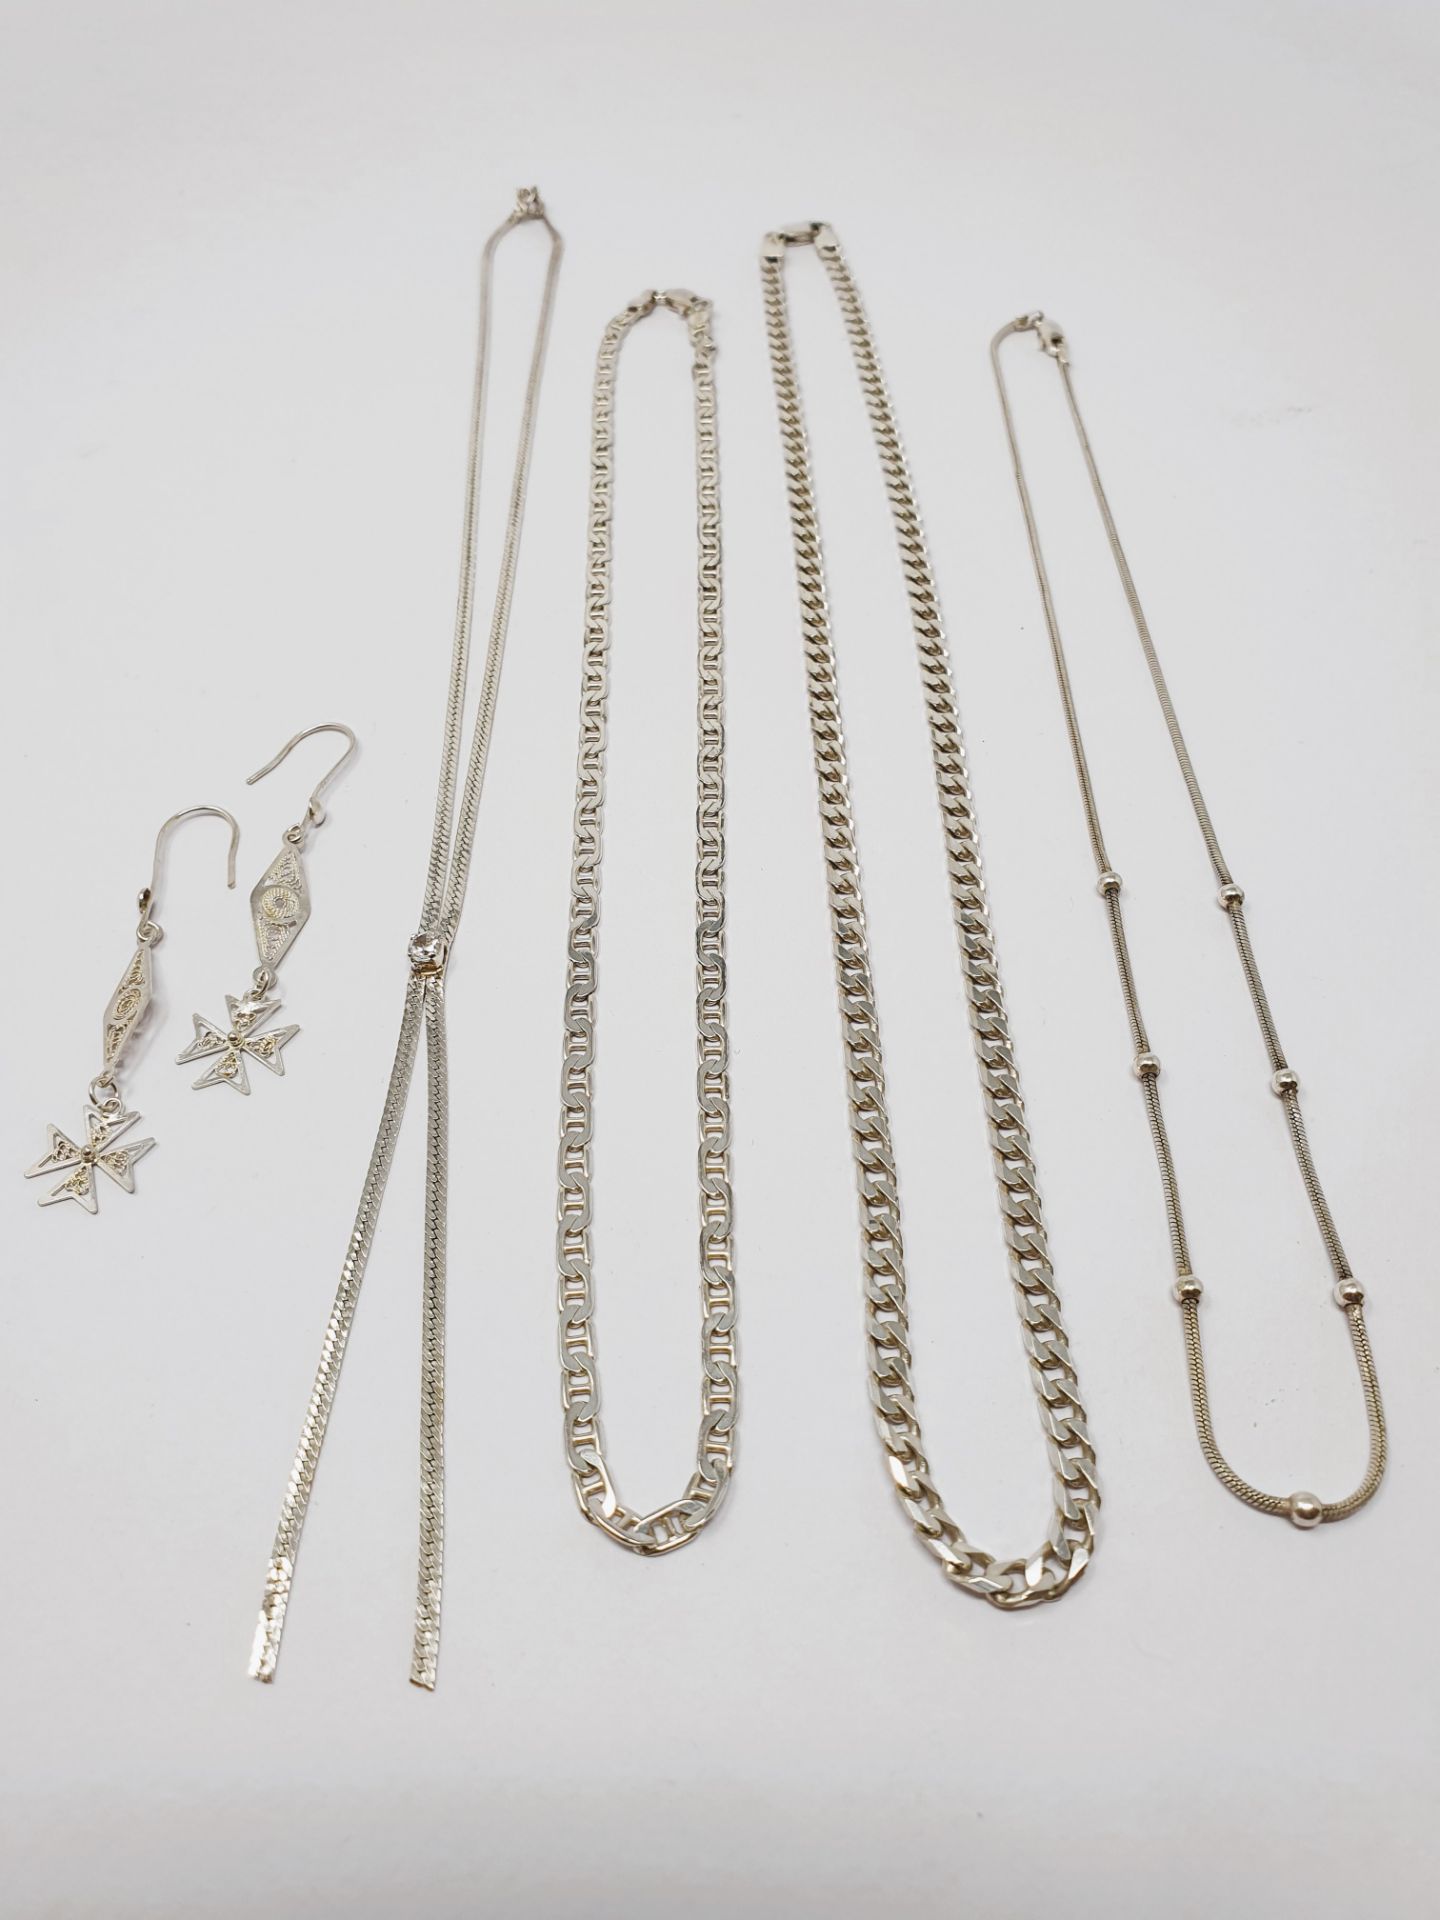 Sterling silver, filed curb chain 500mm, snake/bead chain 430mm, plaited herringbone chain 450mm, - Image 2 of 3